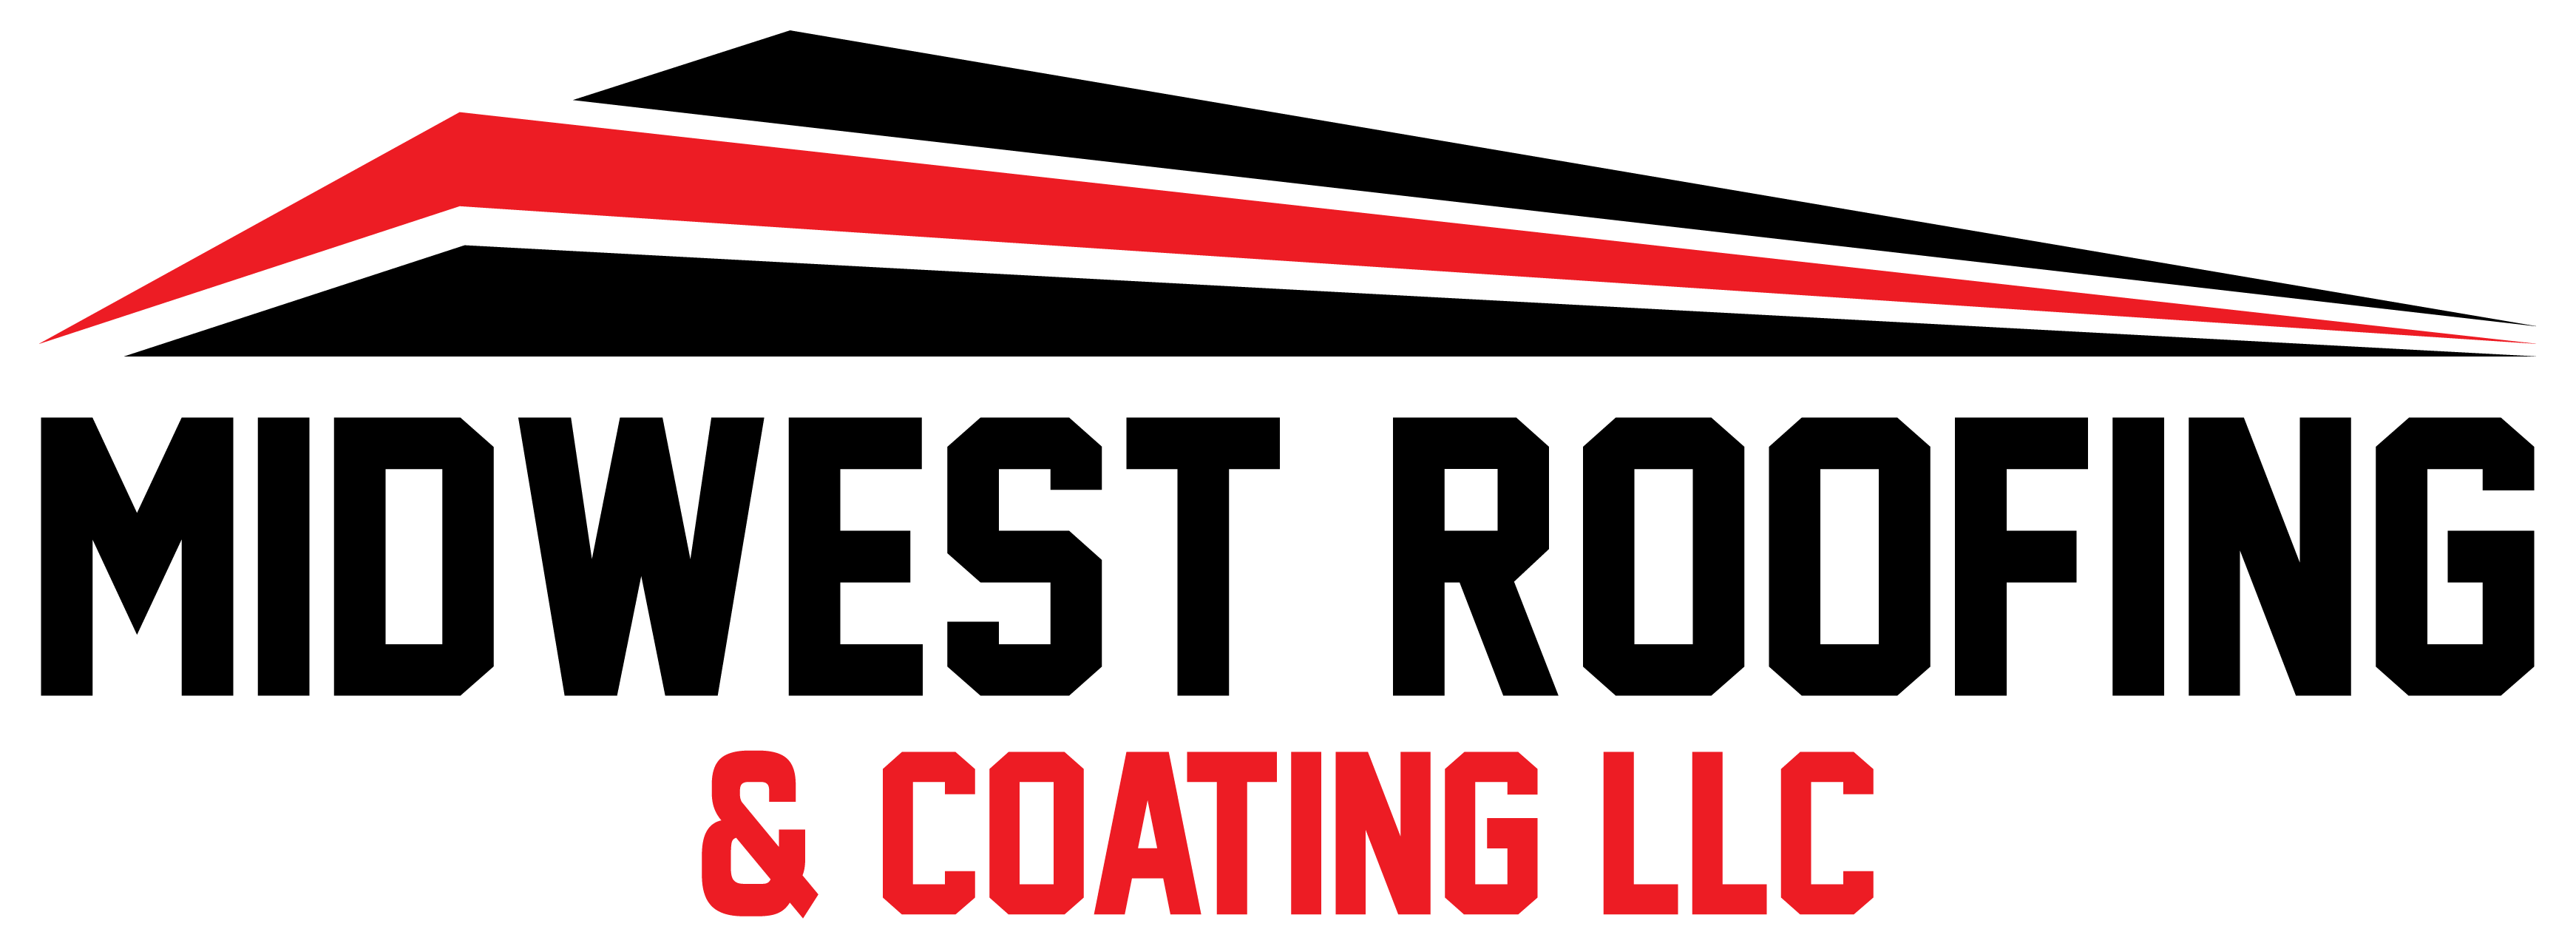 Midwest Roofing & Coating LLC